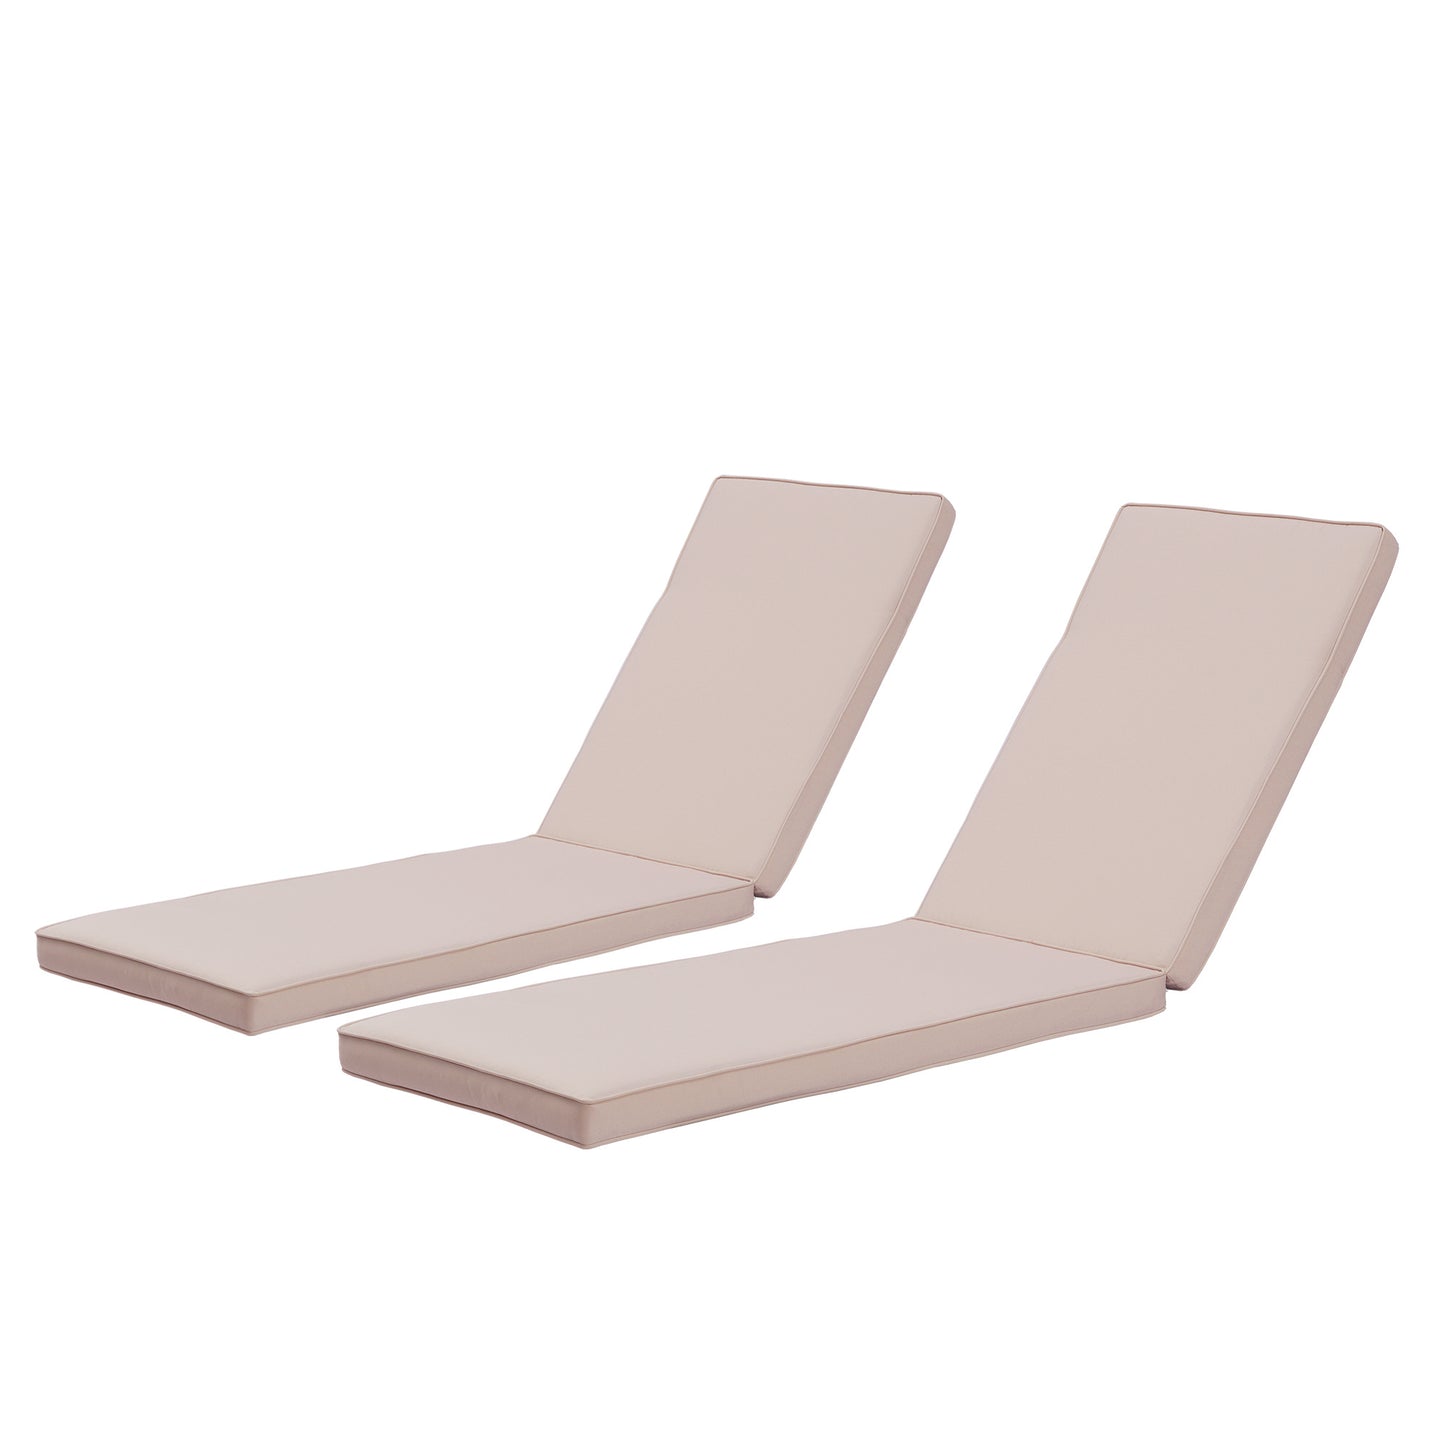 Outdoor Lounge Chair Replacement Cushions (2PCS Set)